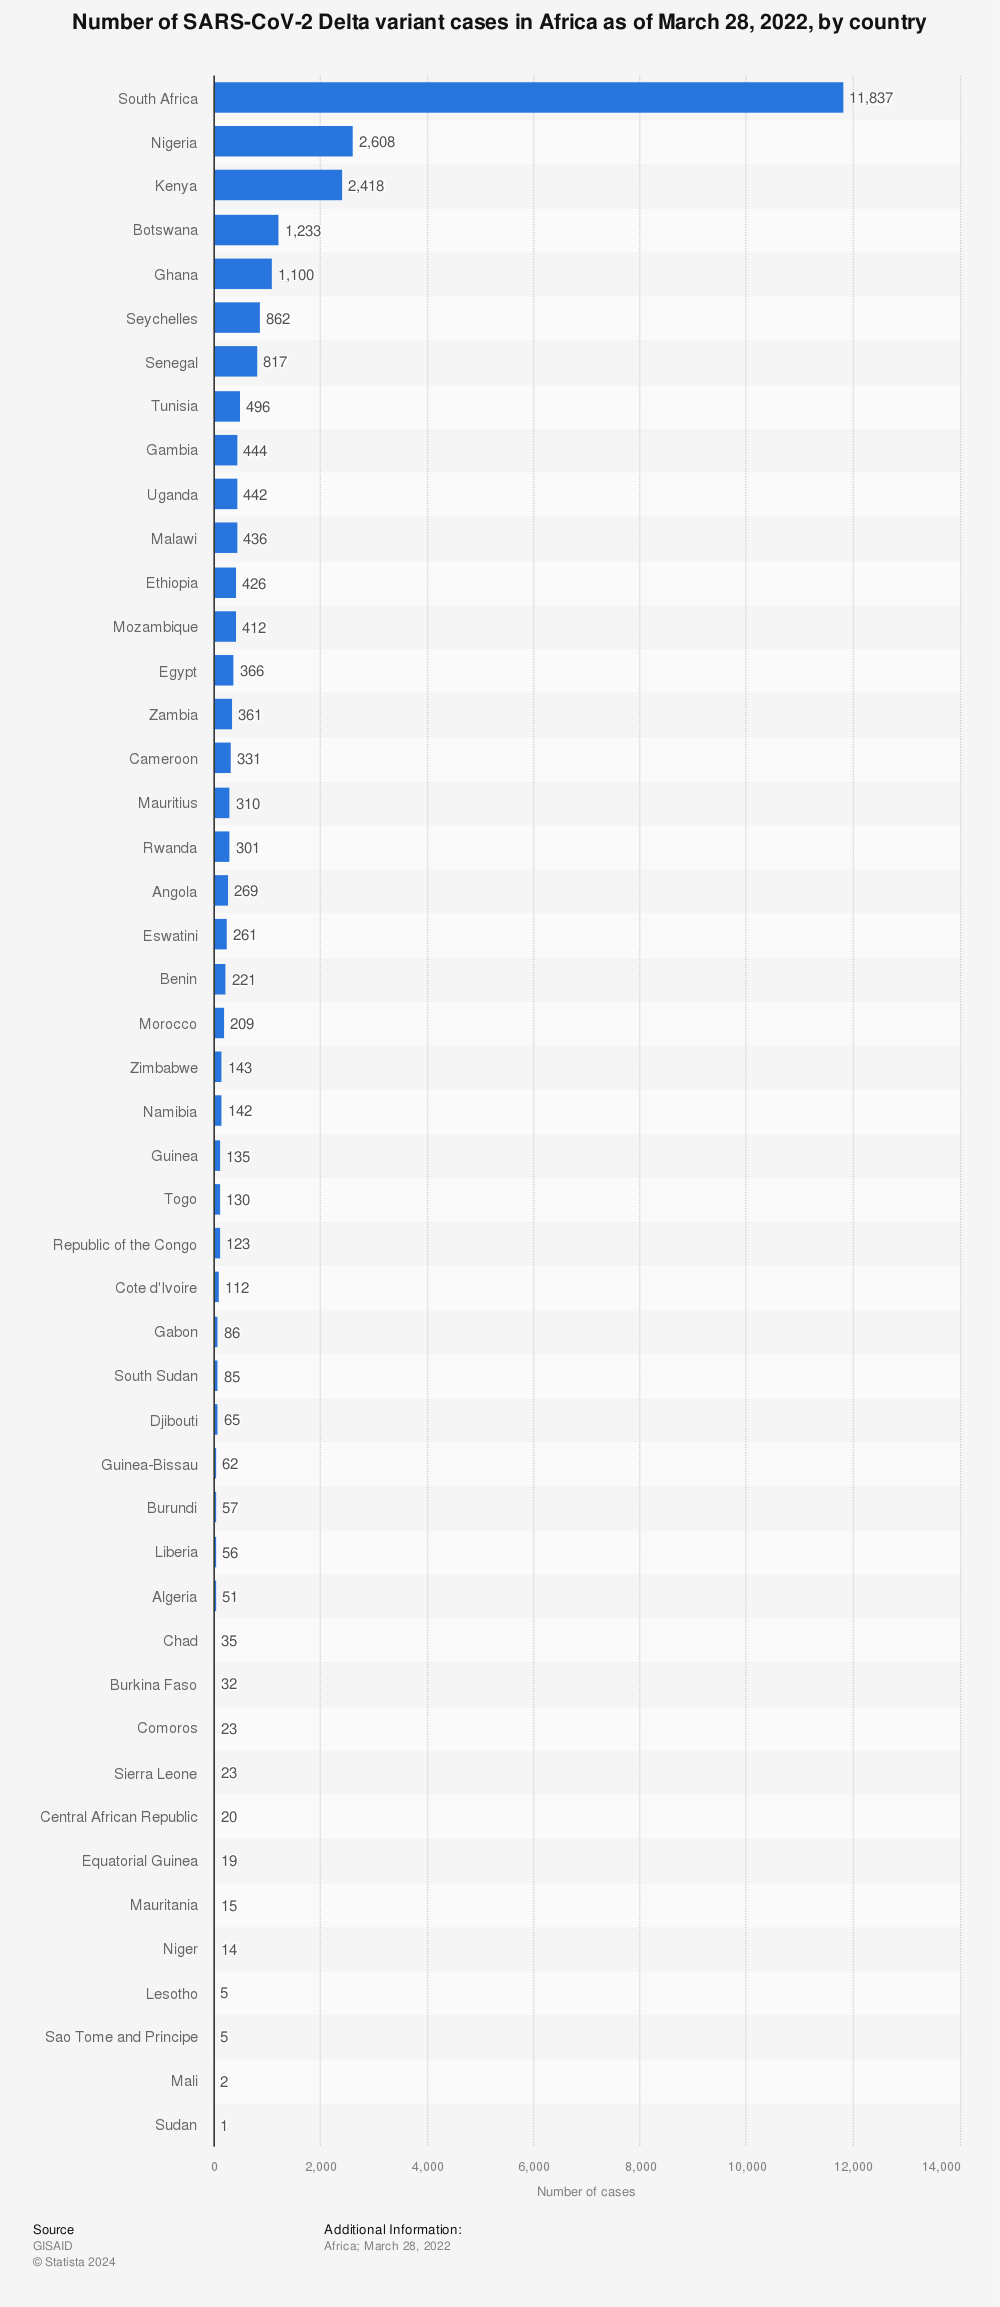 Statistic: Number of SARS-CoV-2 Delta variant cases in Africa as of March 28, 2022, by country | Statista